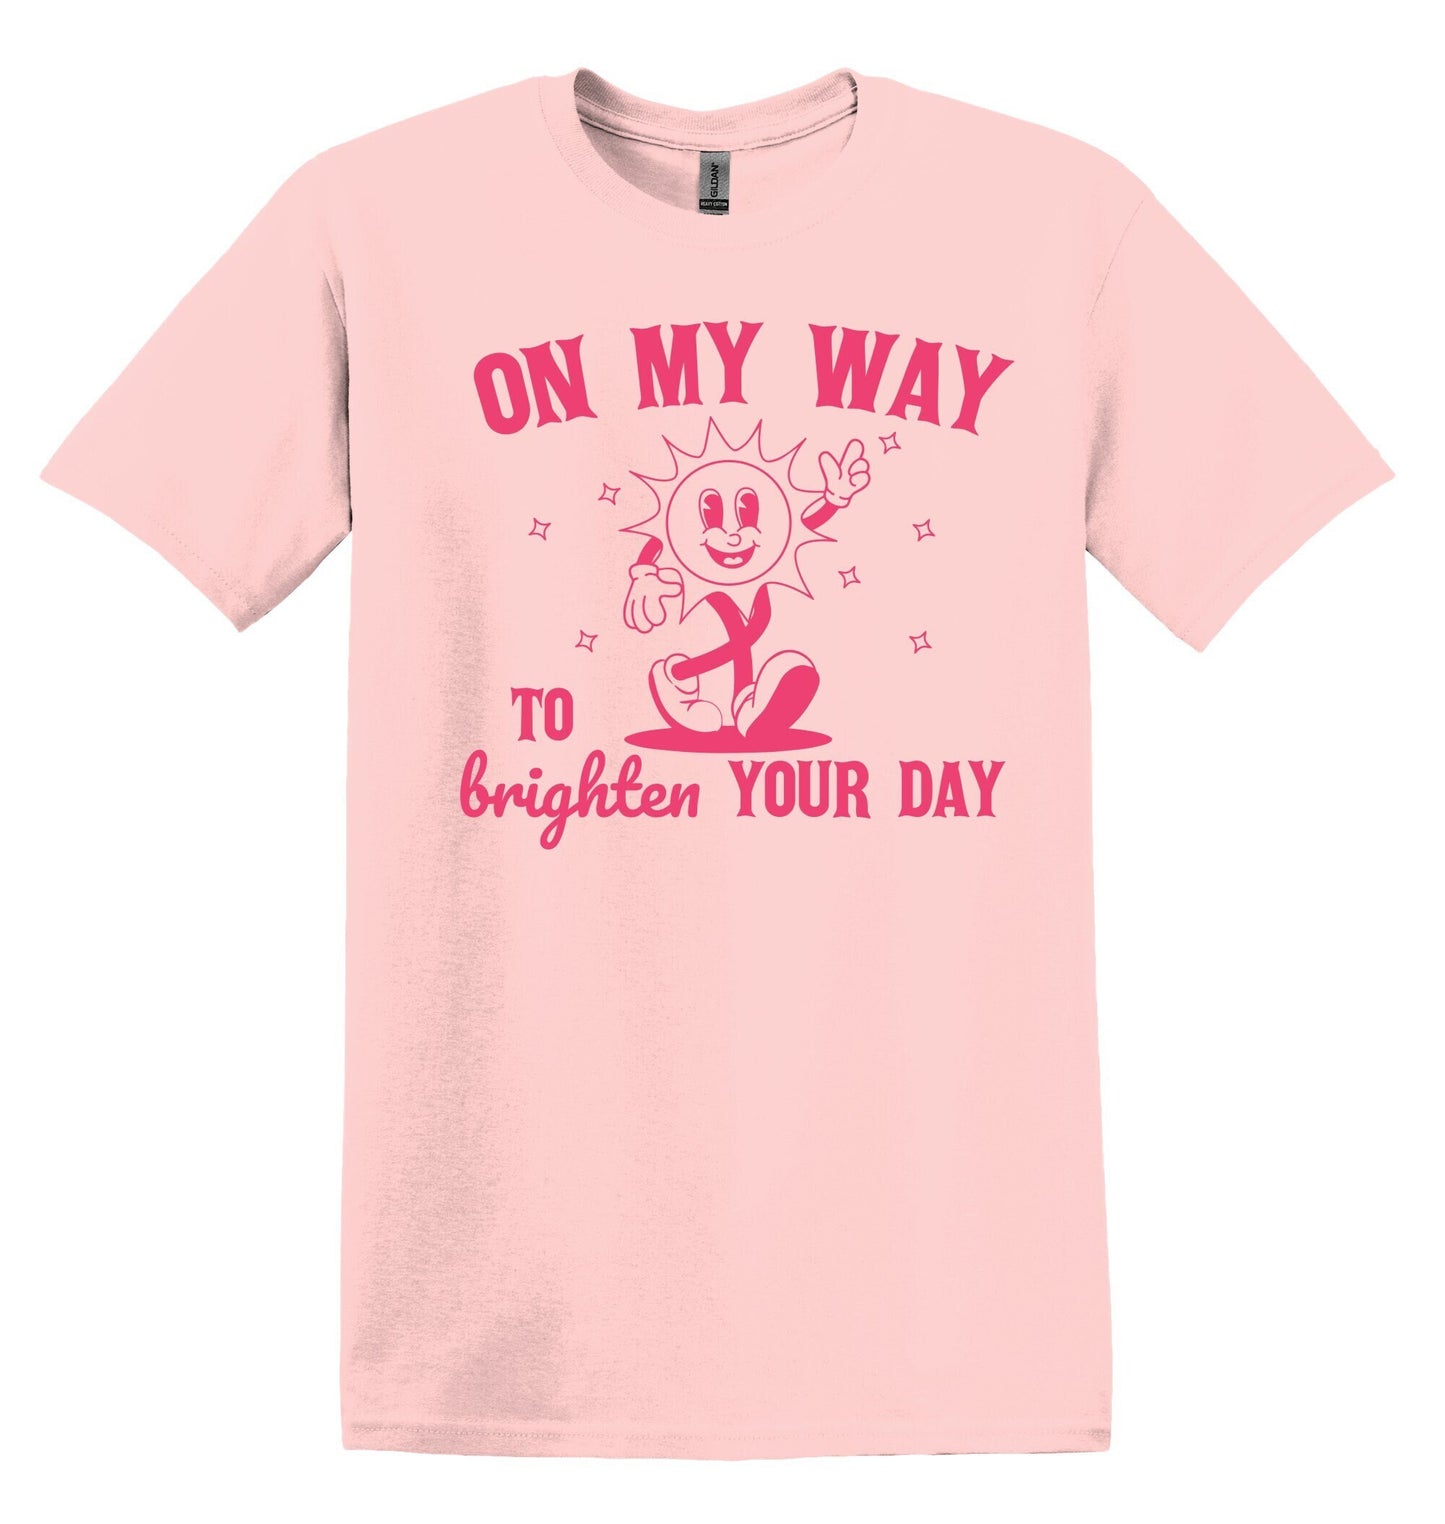 On My Way to Bright Your Day T-shirt Graphic Shirt Funny Adult TShirt Vintage Funny TShirt Nostalgia T-Shirt Relaxed Cotton Tee T-Shirt